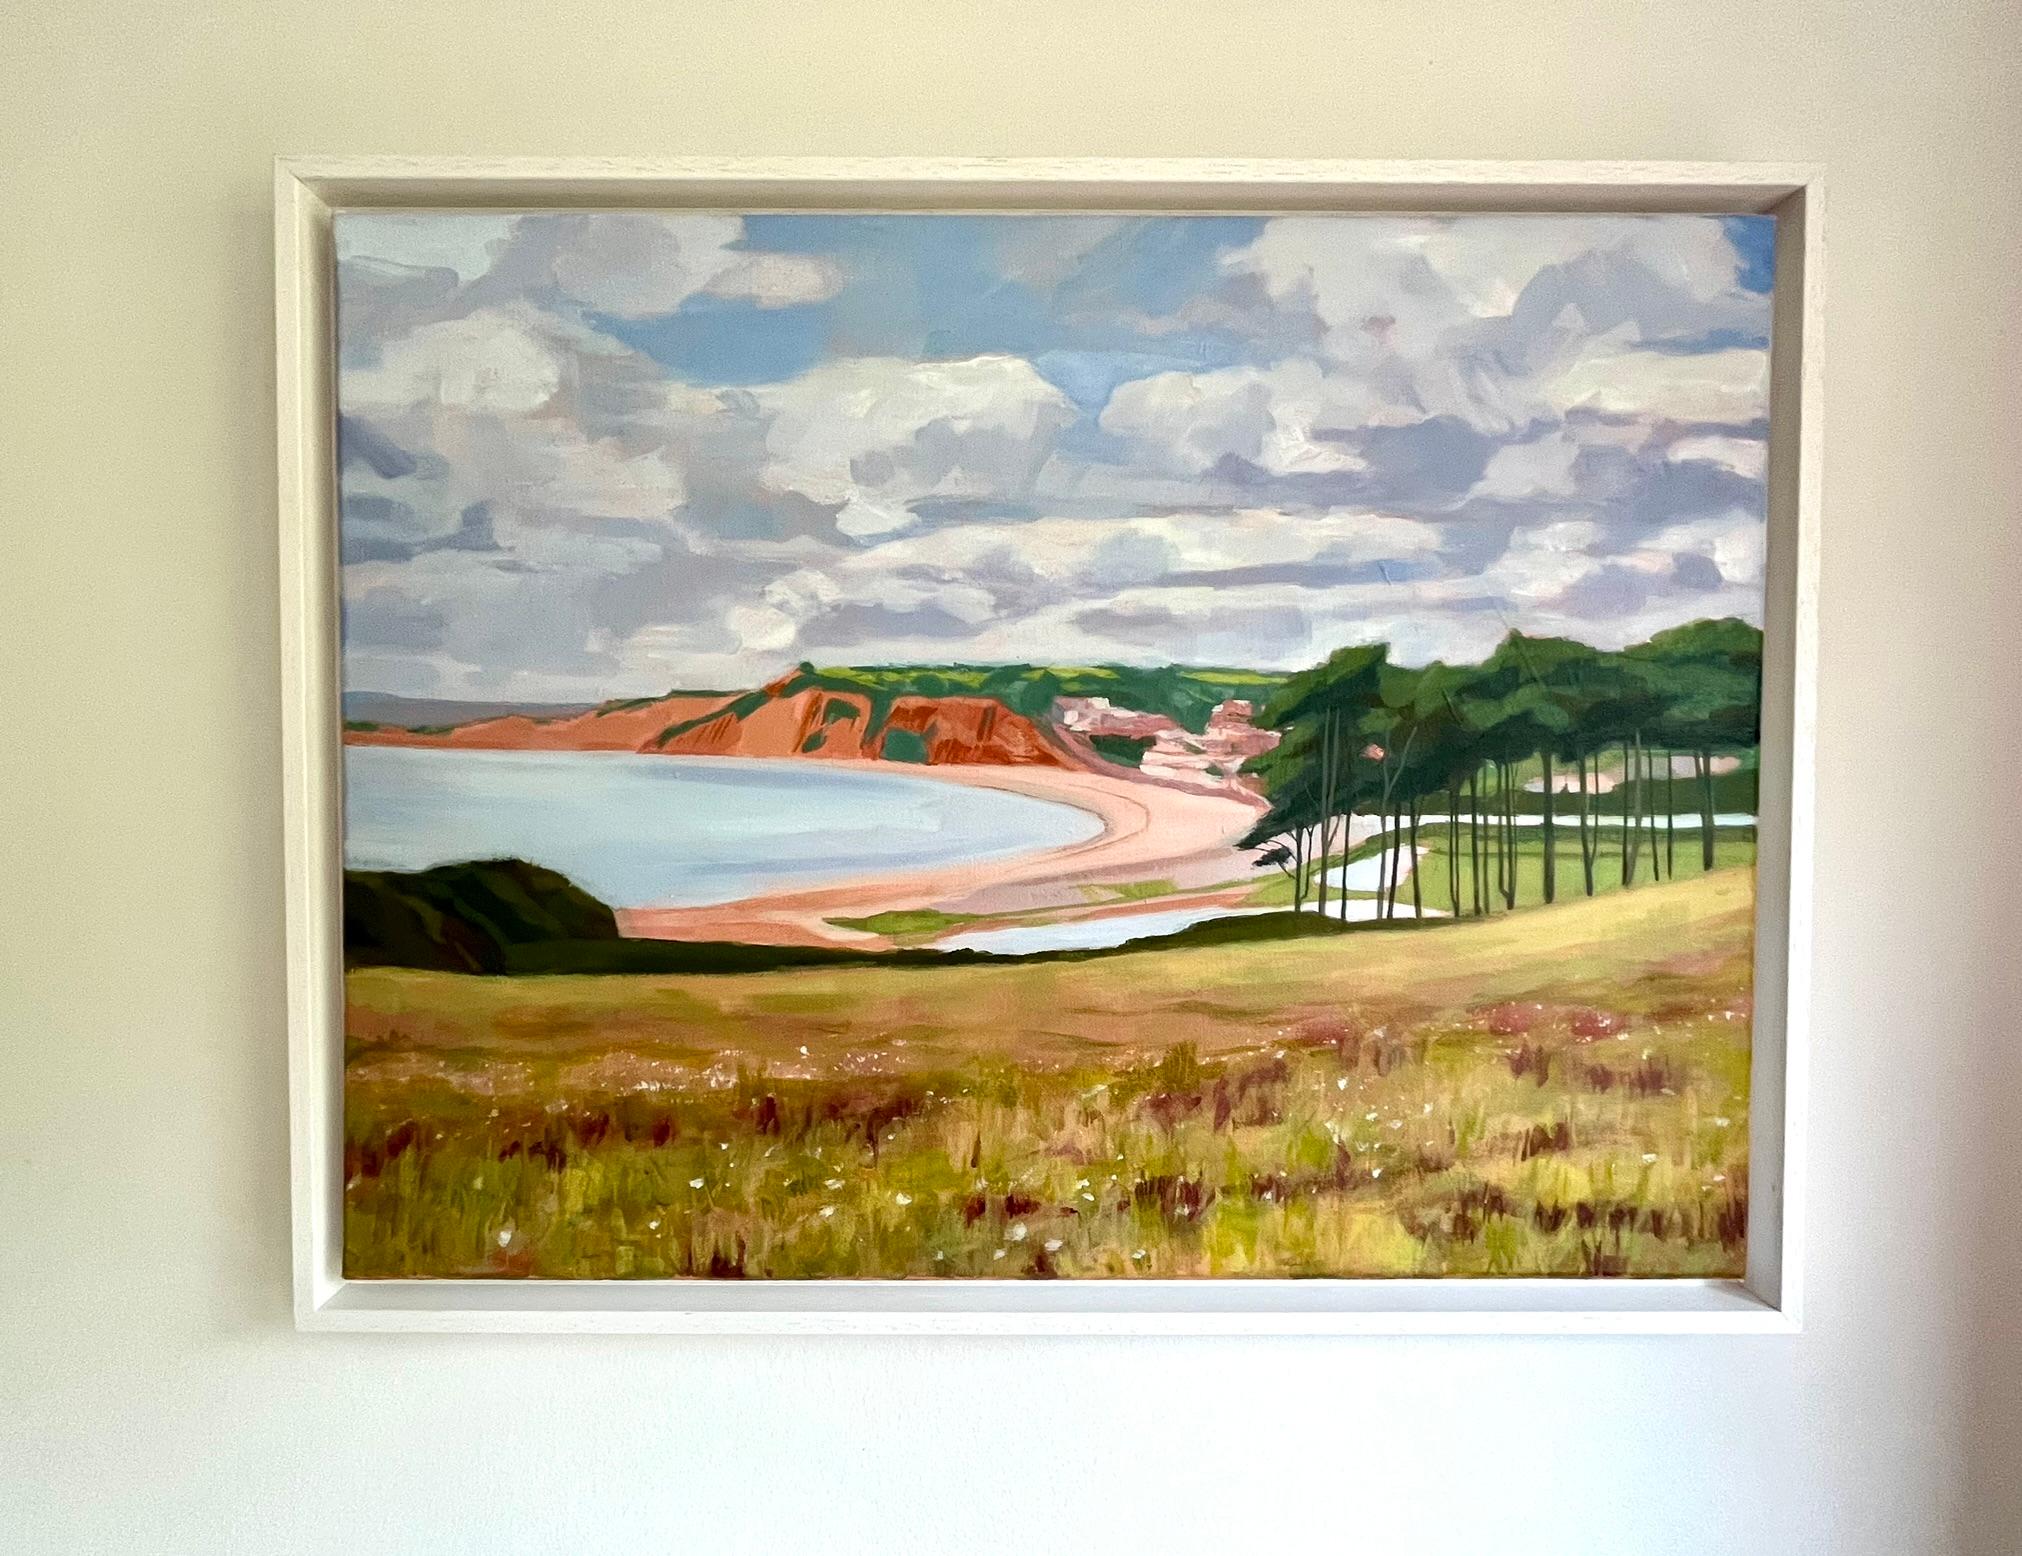  View of Budleigh Salterton from the Cliff, Original painting, Landscape  - Painting by Margaret Crutchley